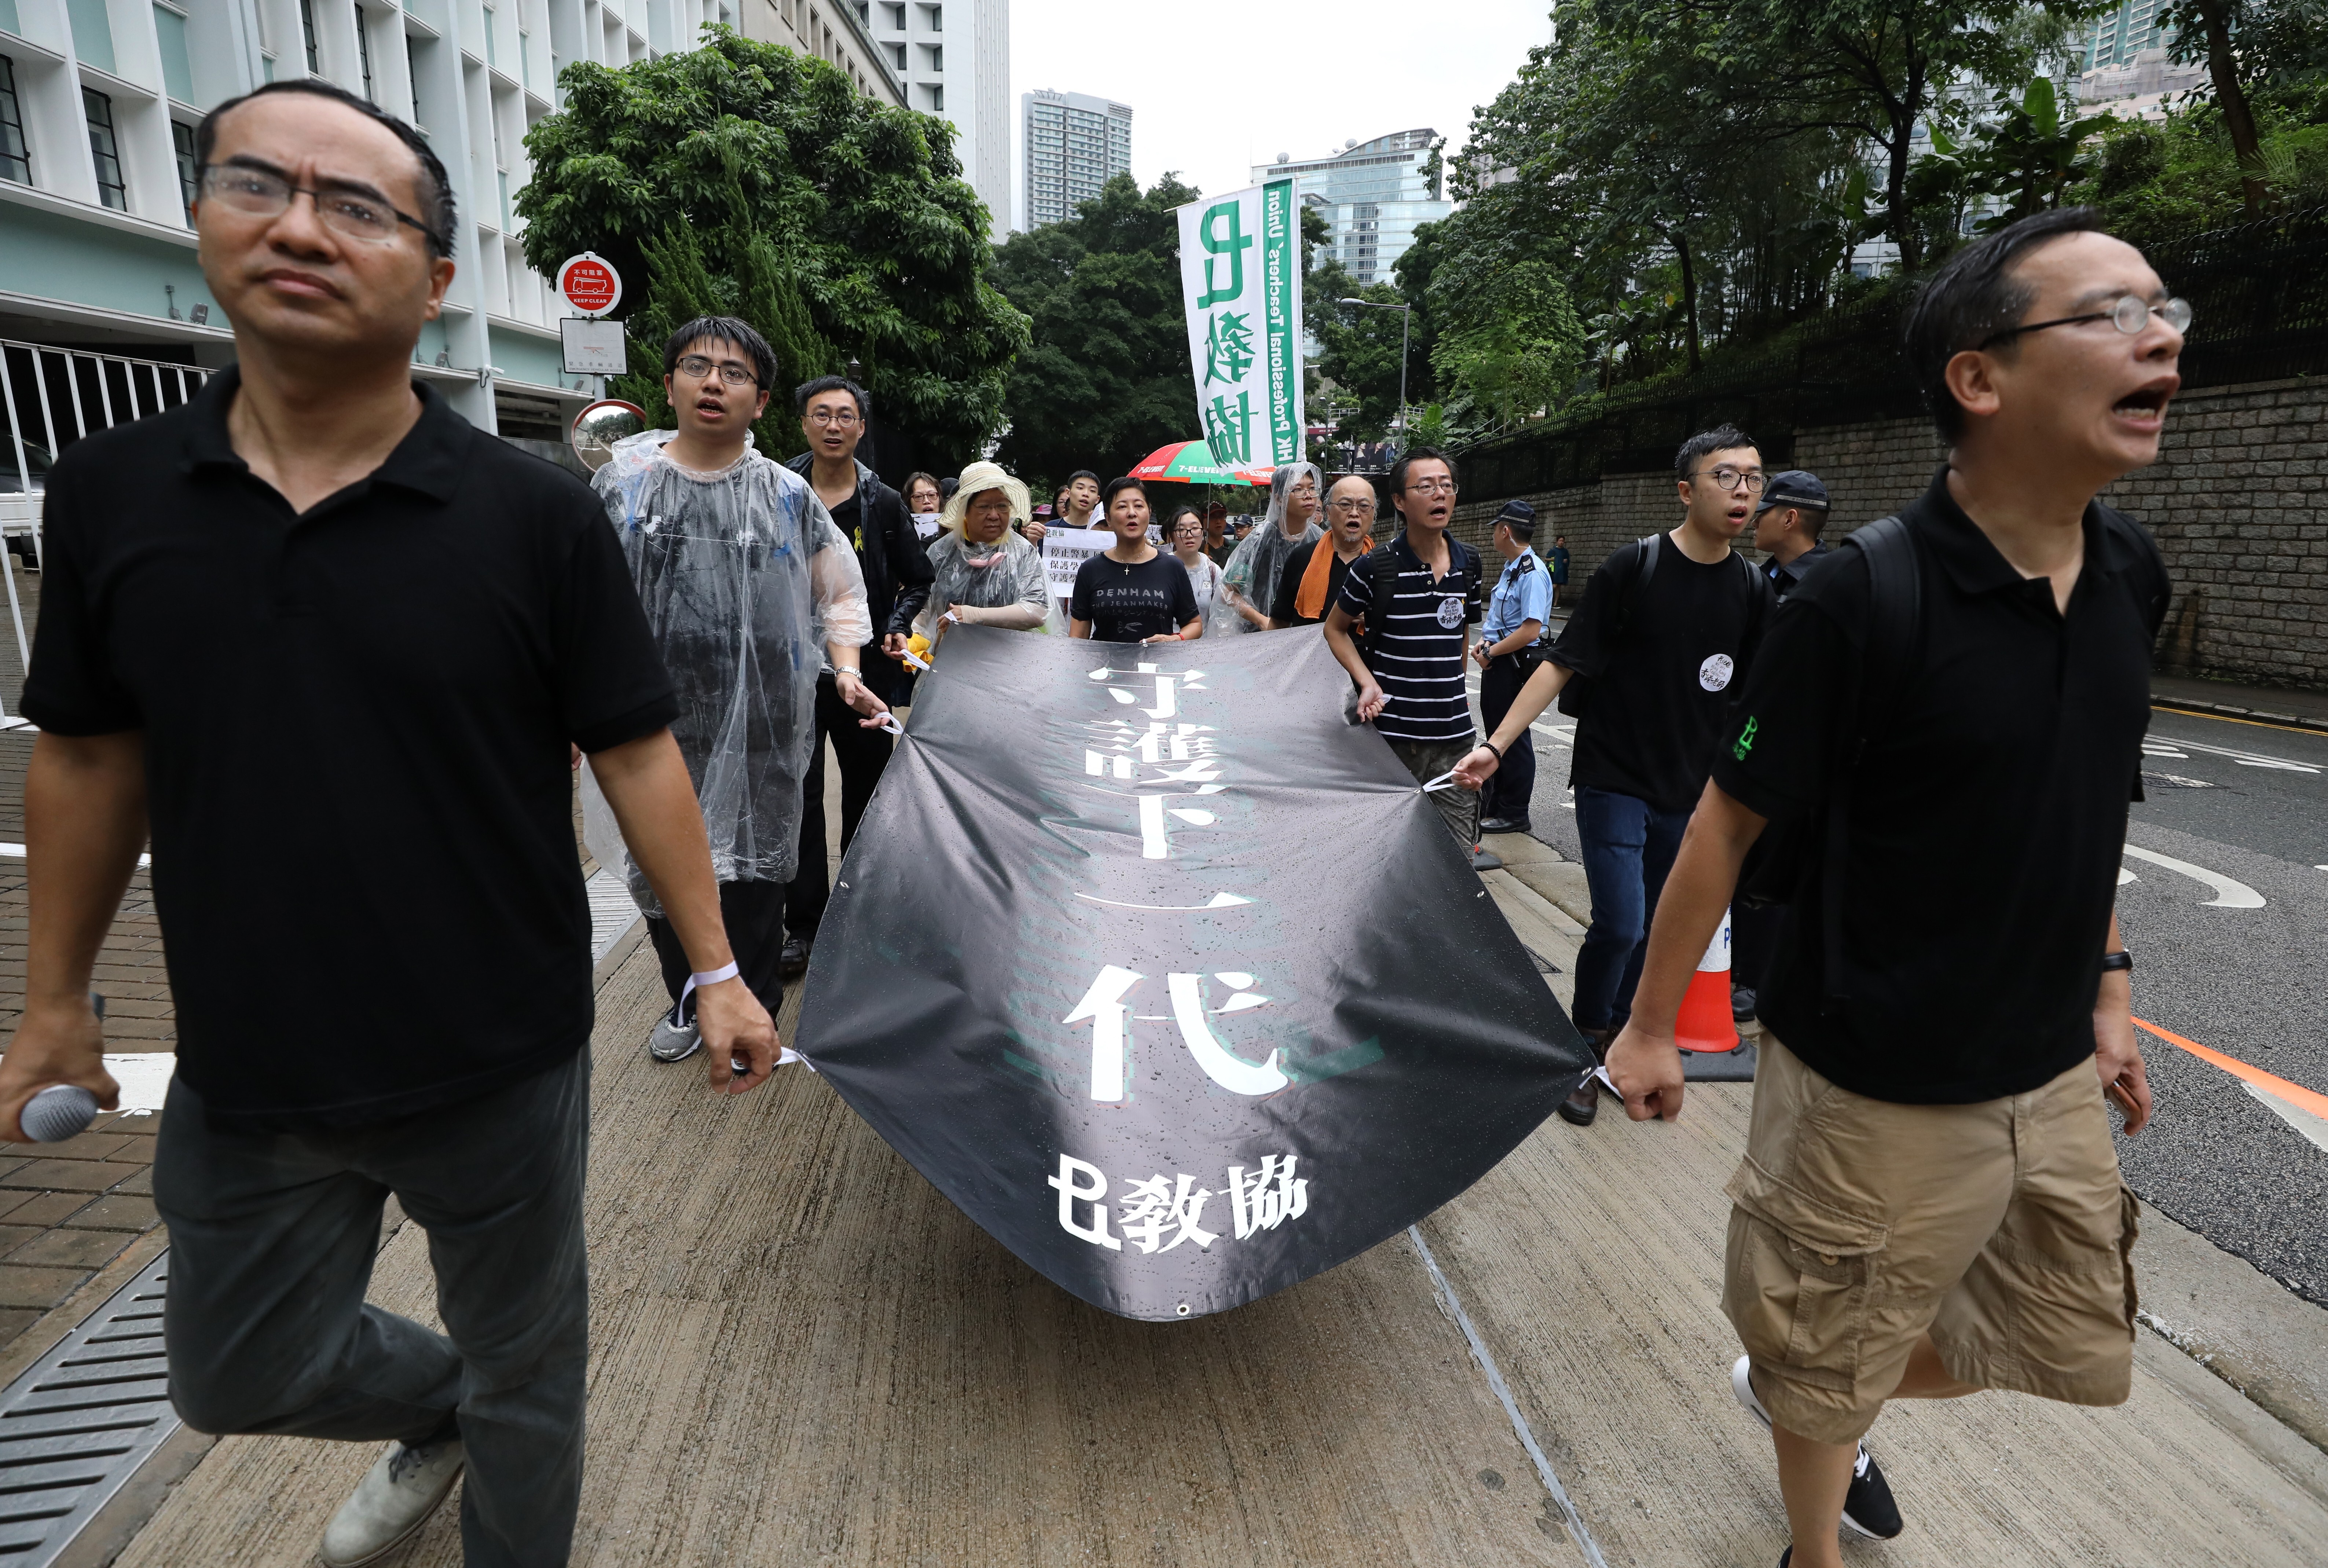 PTU chief Fung Wai-wah (left) and vice-president Ip Kin-yuen lead a teachers’ rally against the extradition bill in 2019. Photo: Dickson Lee